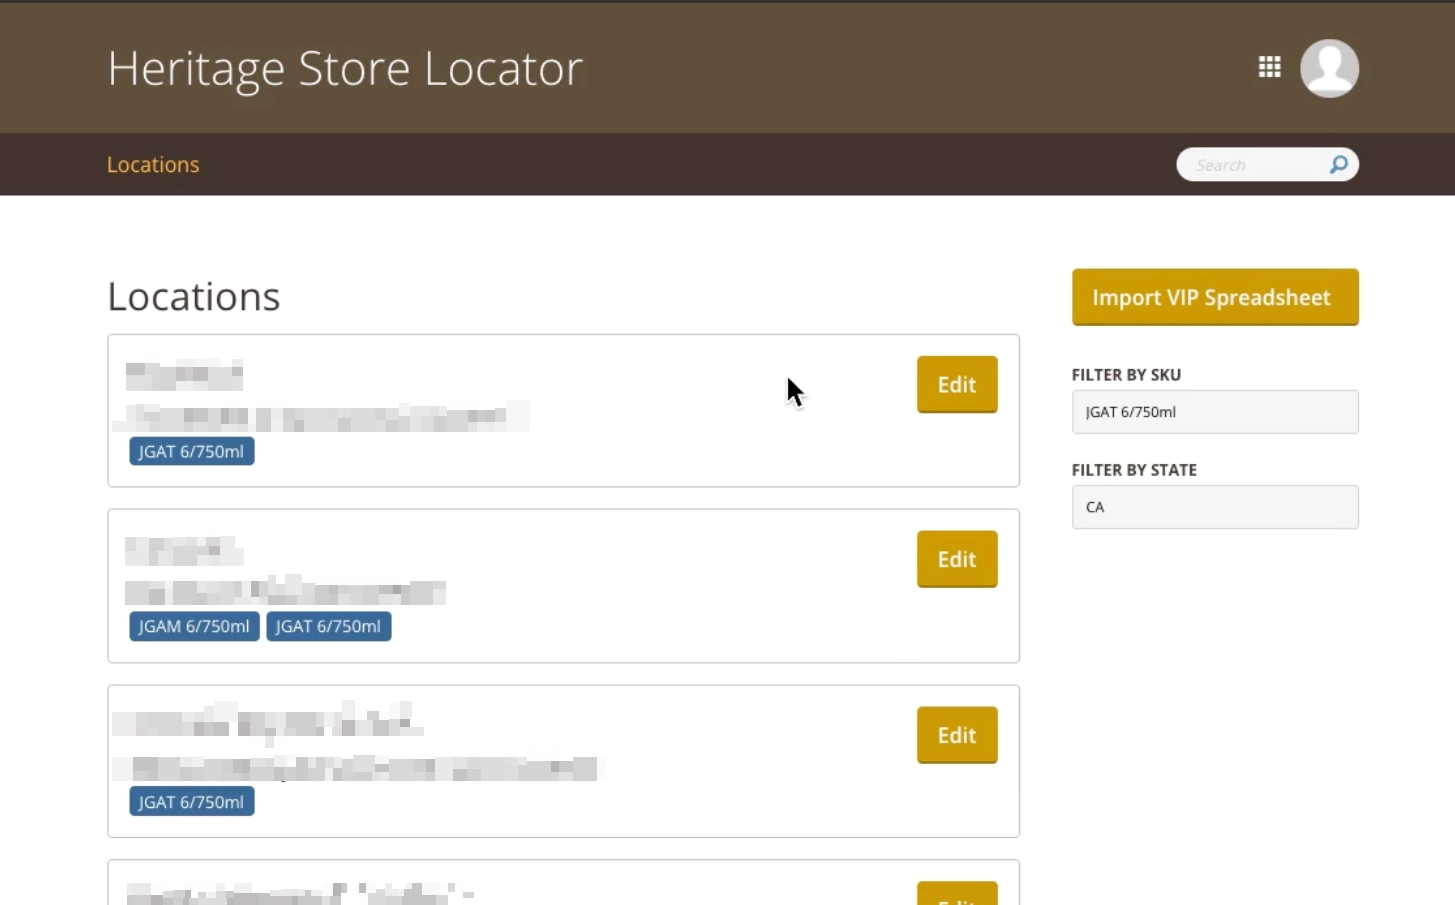 The store locator’s home page, filtered by SKU and location